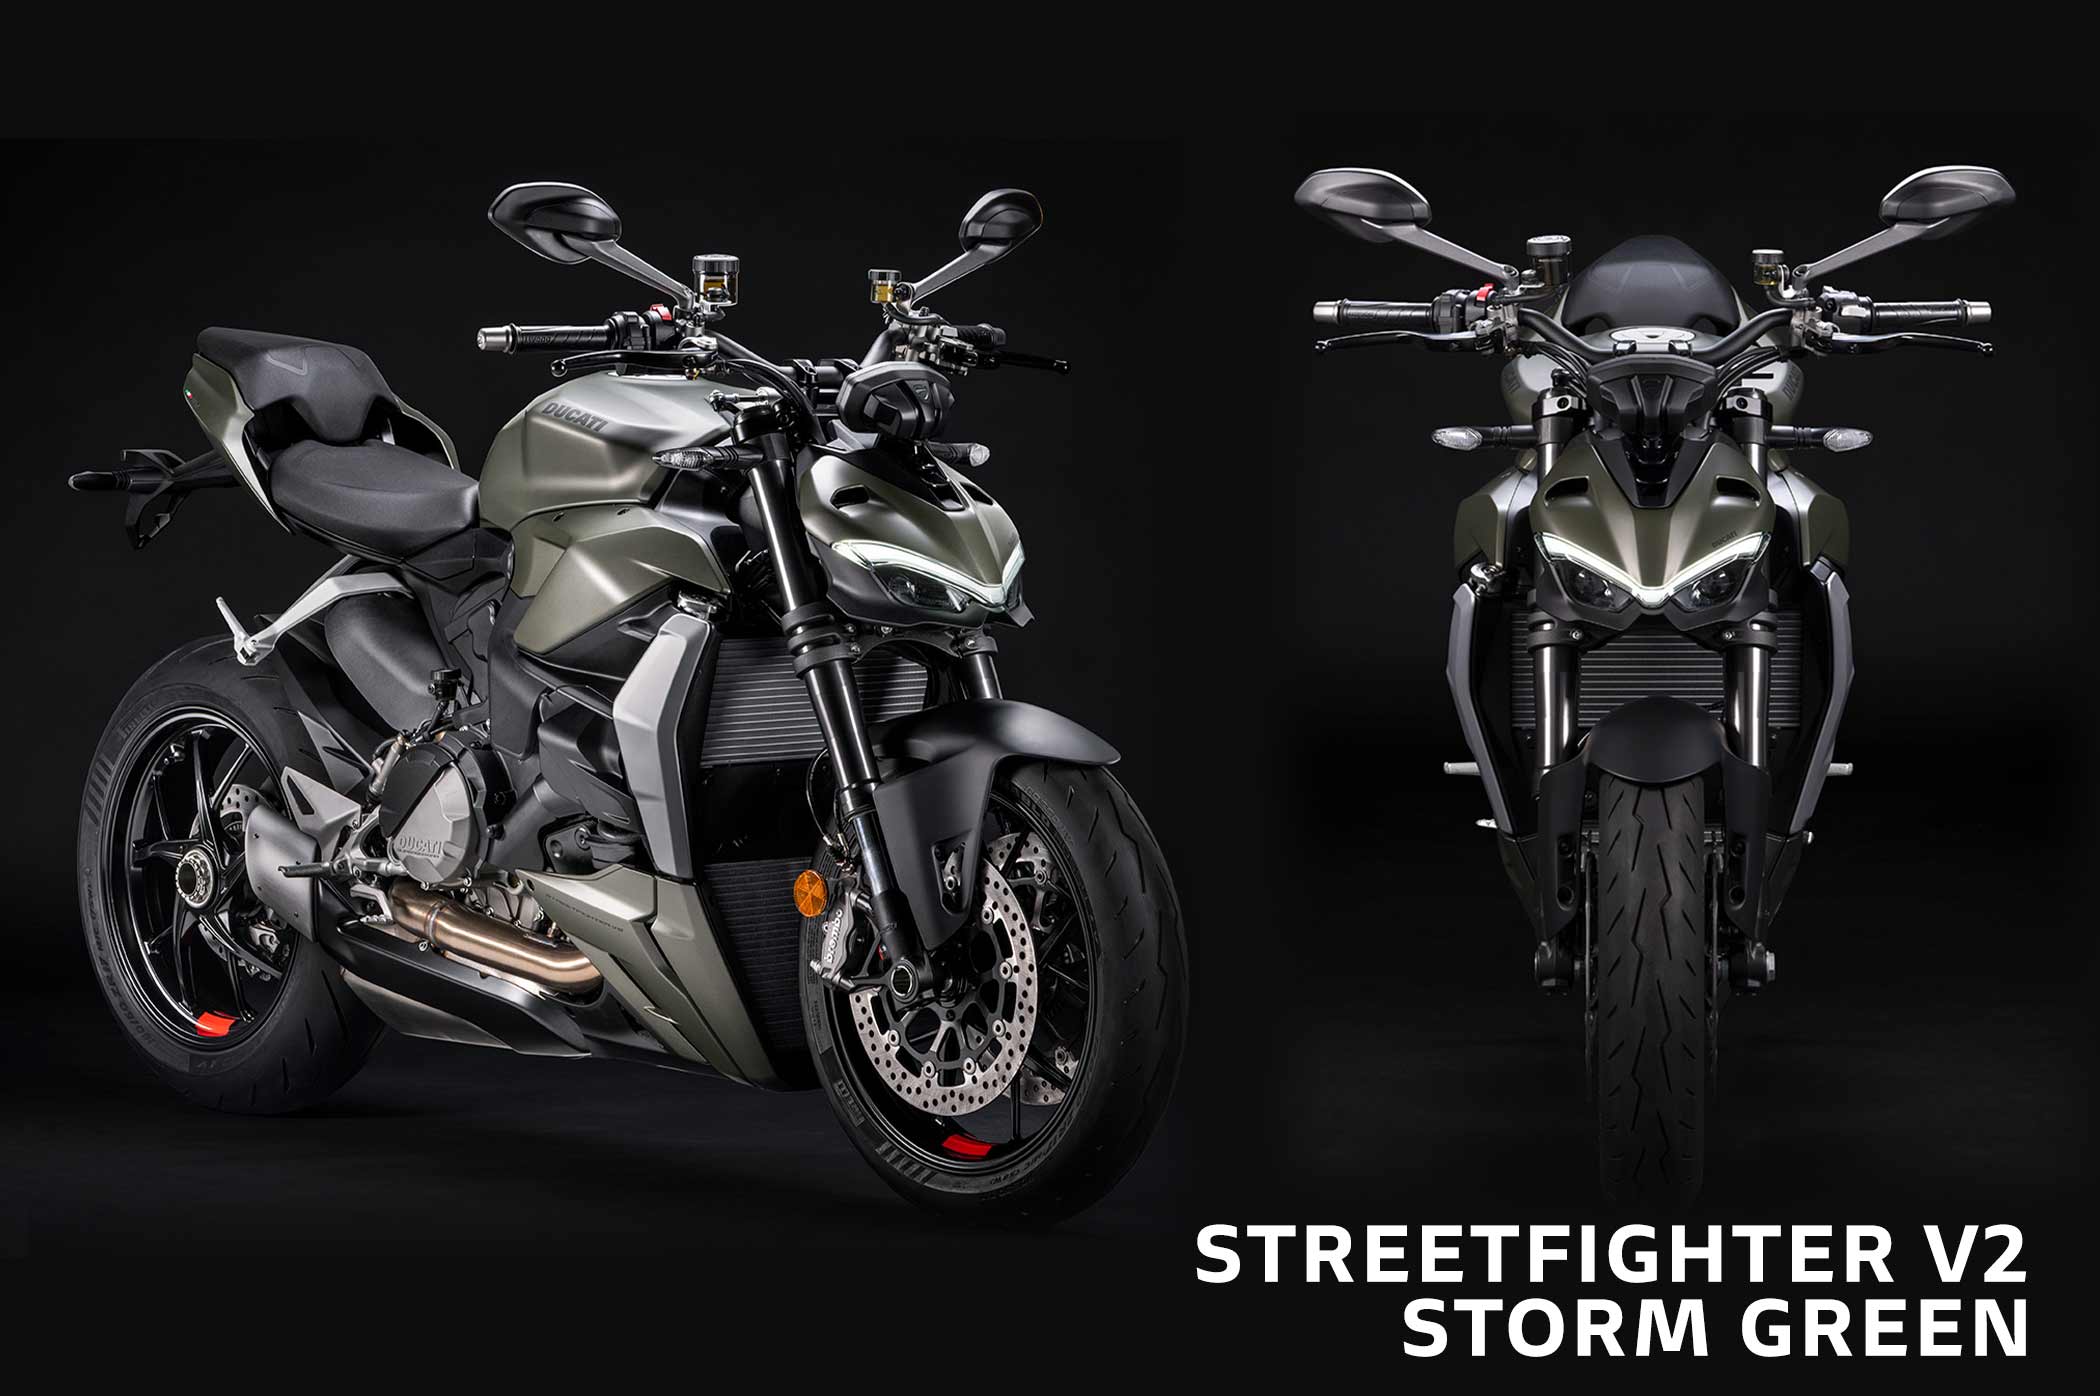 The New Ducati Streetfighter V2 - Storm Green Colour